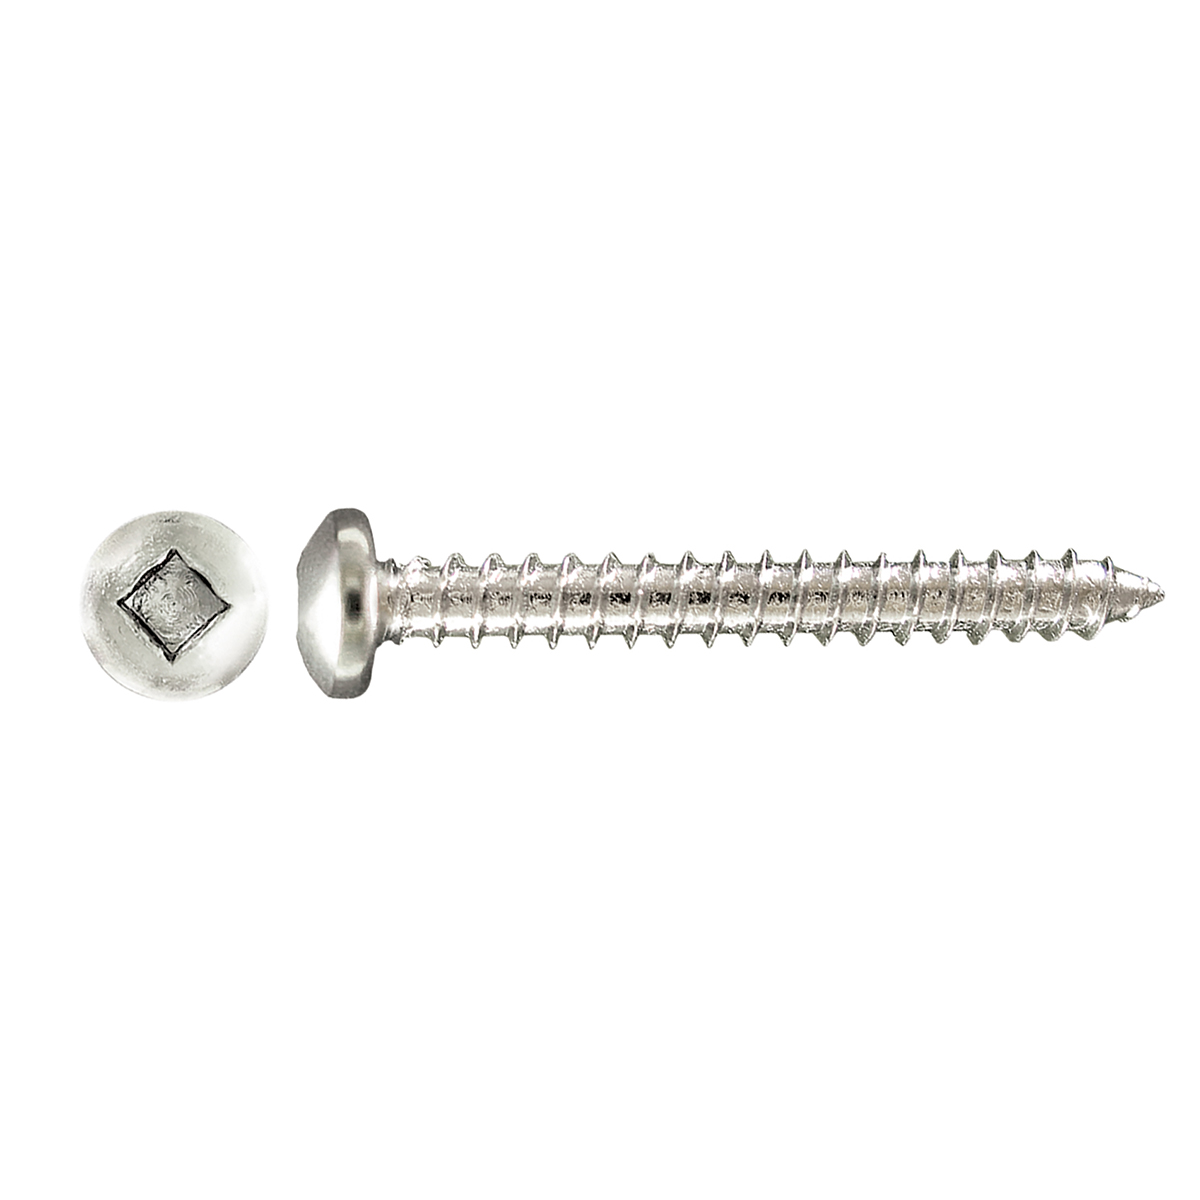 H PAULIN 208-193 Papco® Tapping Screw Square Socket #10 Carbon